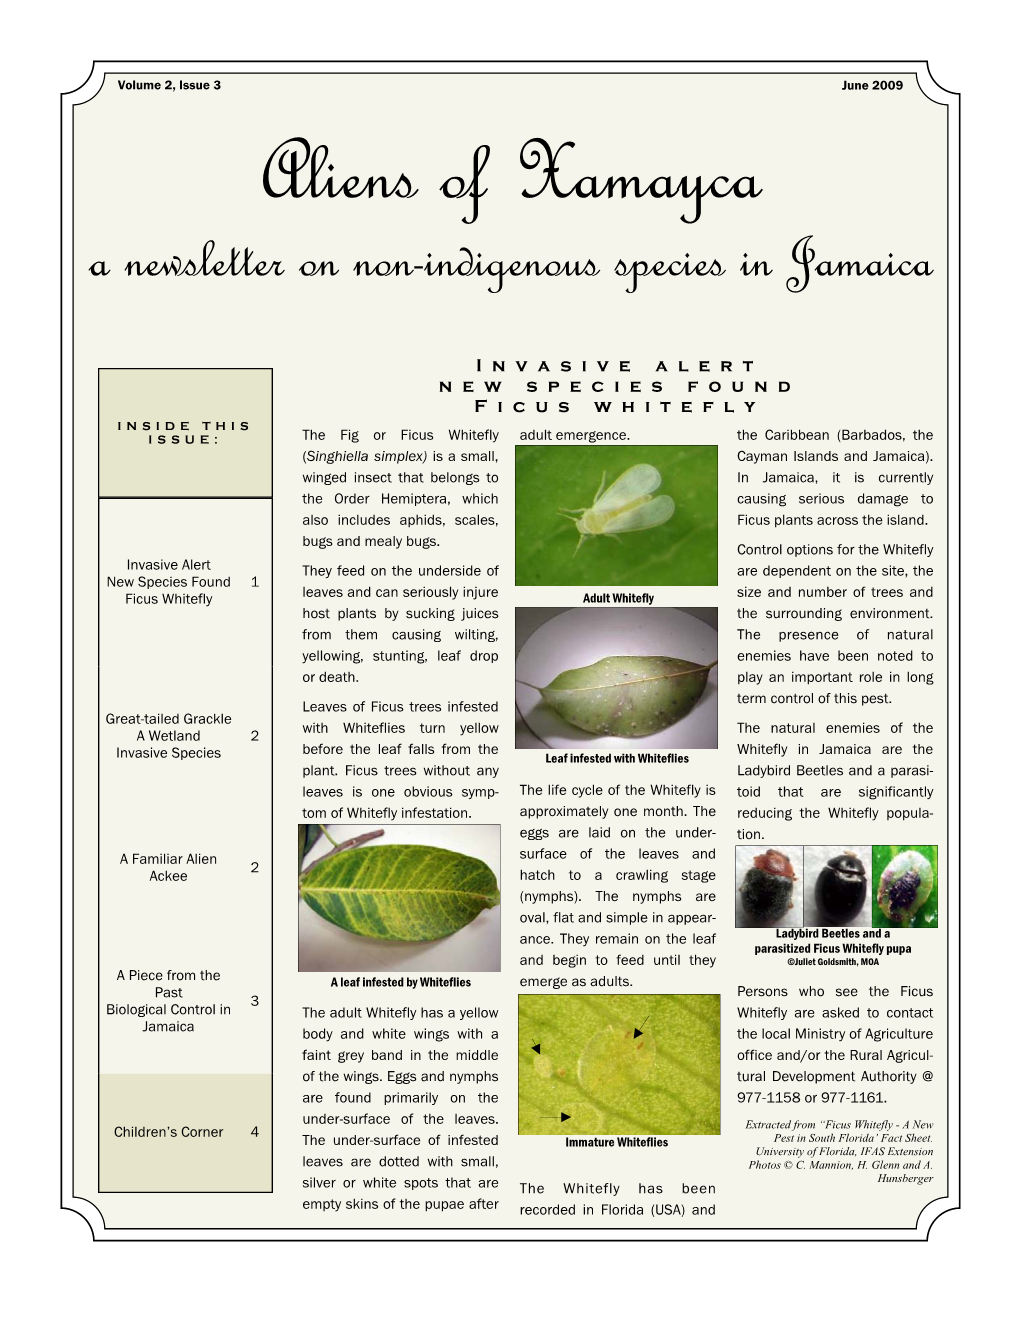 Aliens of Xamayca, a Newsletter on Non-Indigenous Species in Jamaica Volume 2 Issue 3